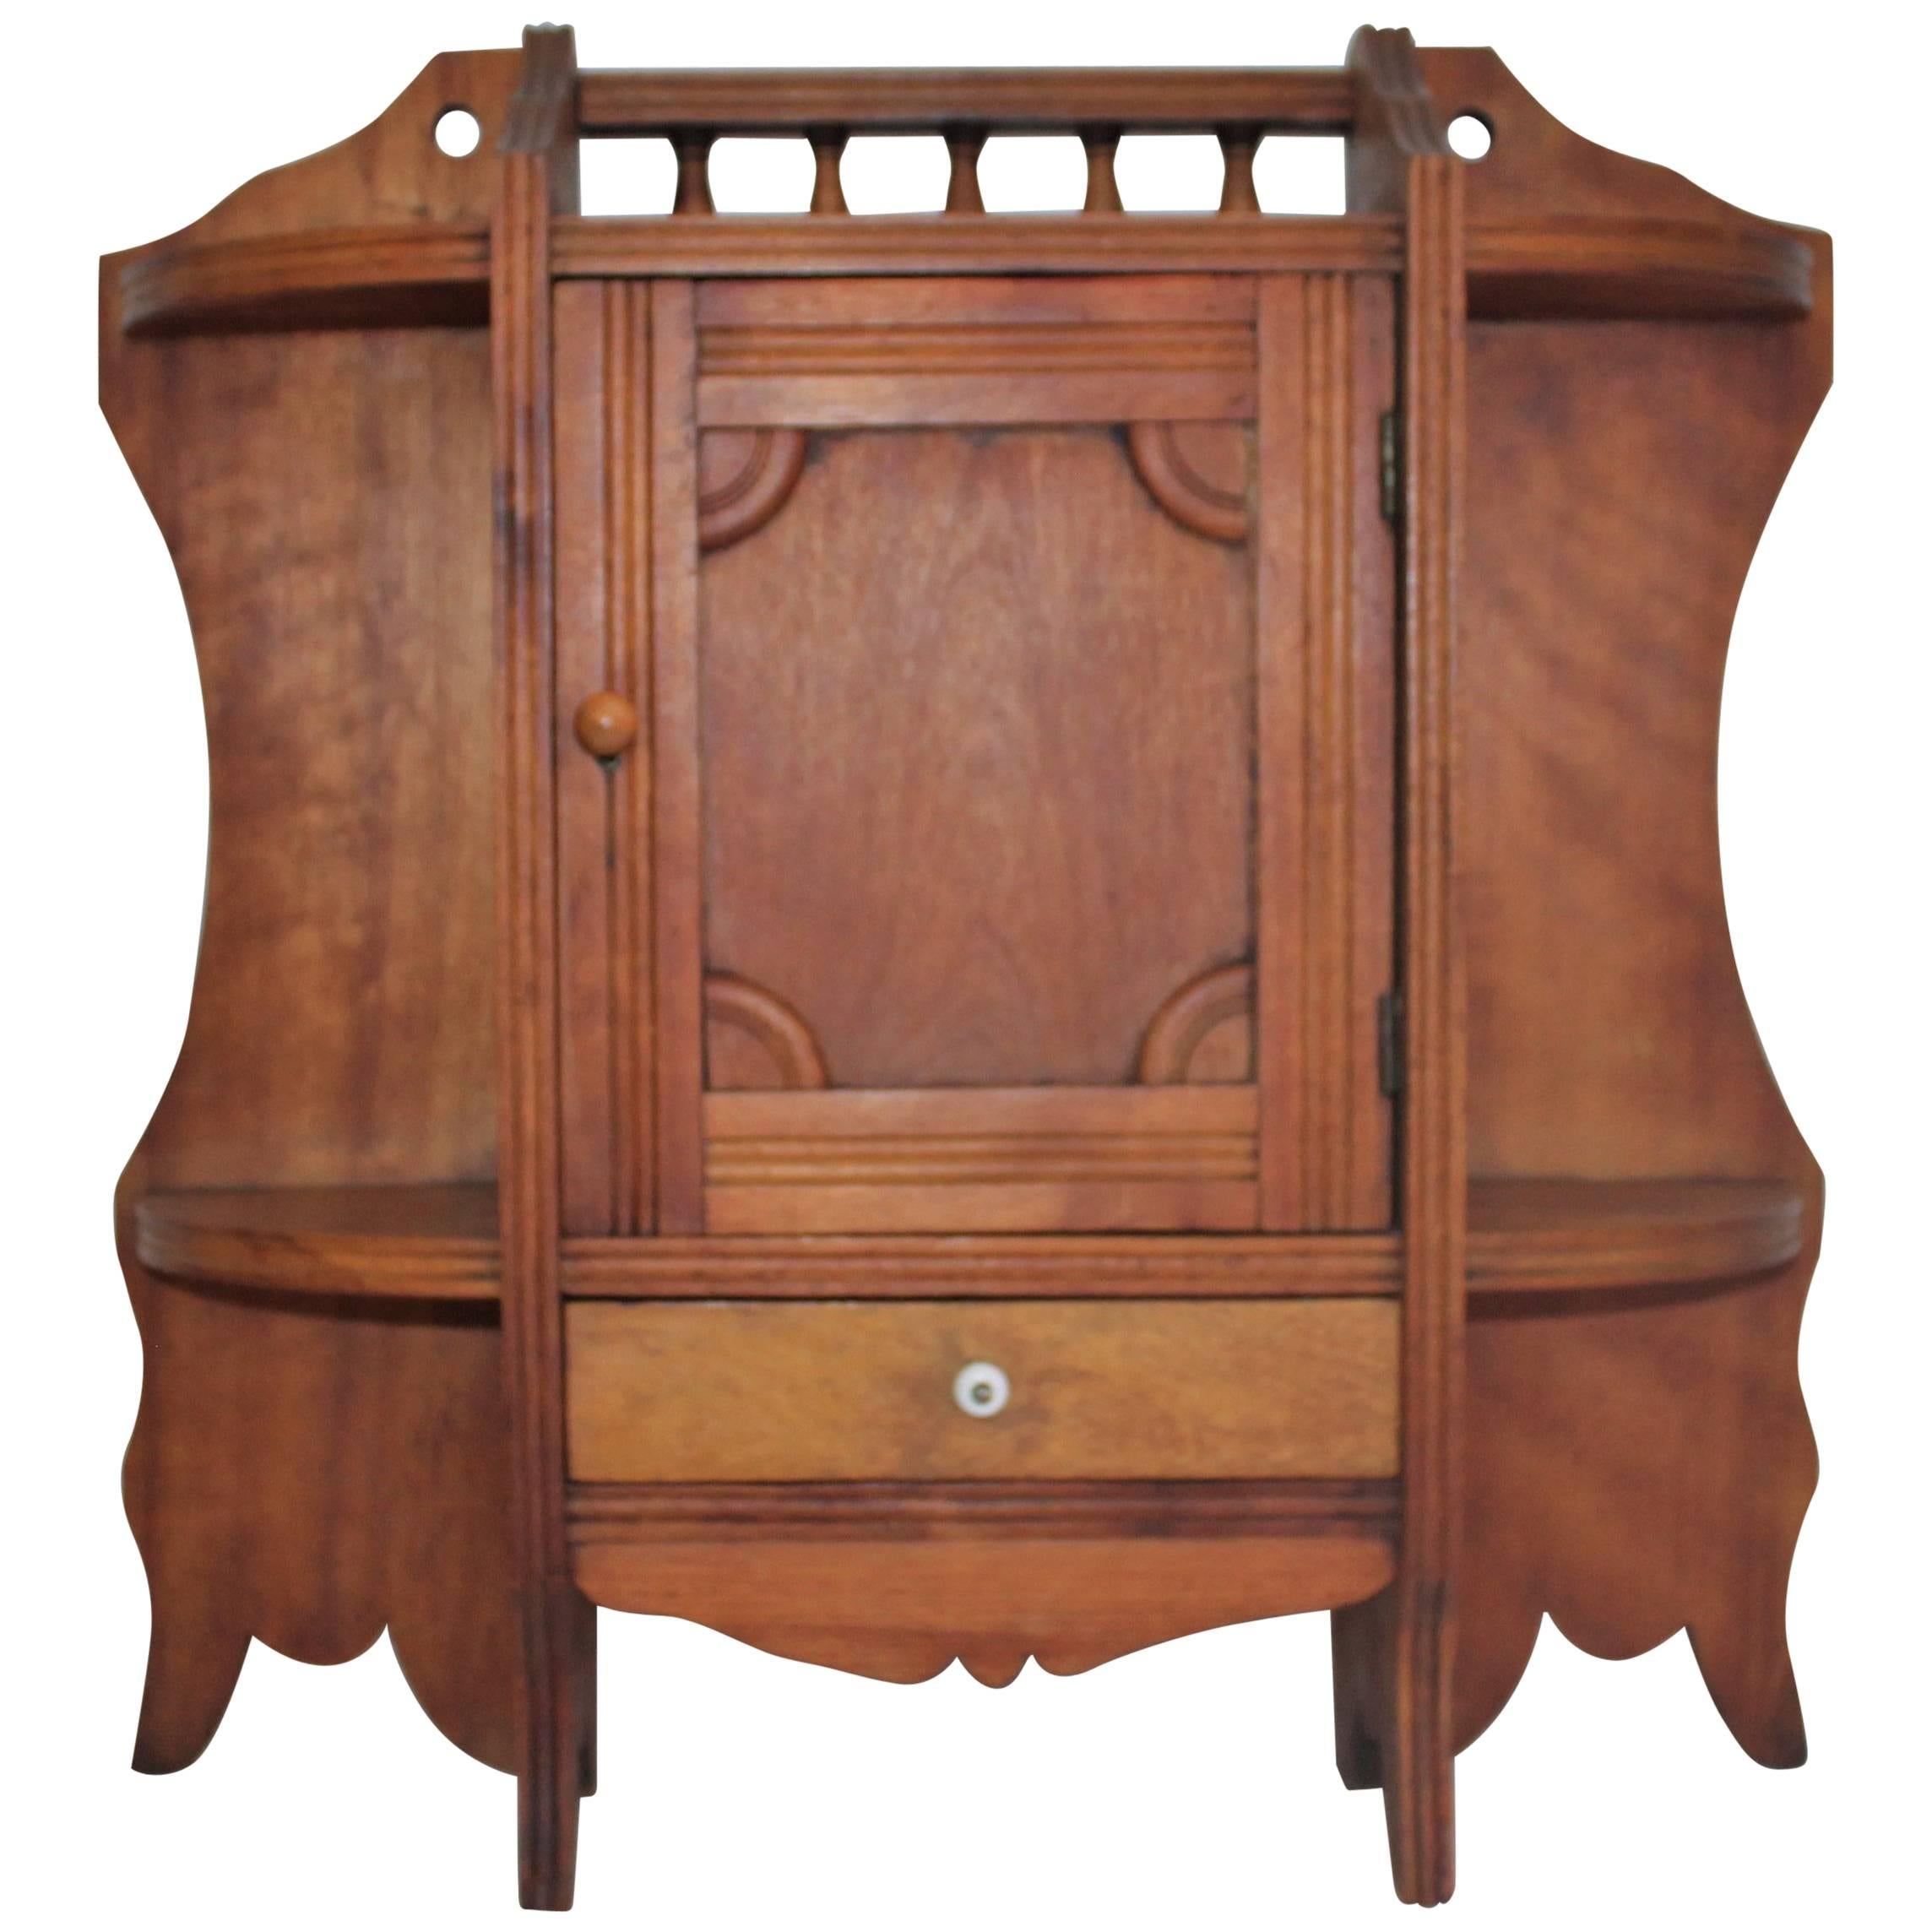 Hanging Medicine Cabinet with One Drawer, 19th Century Pine